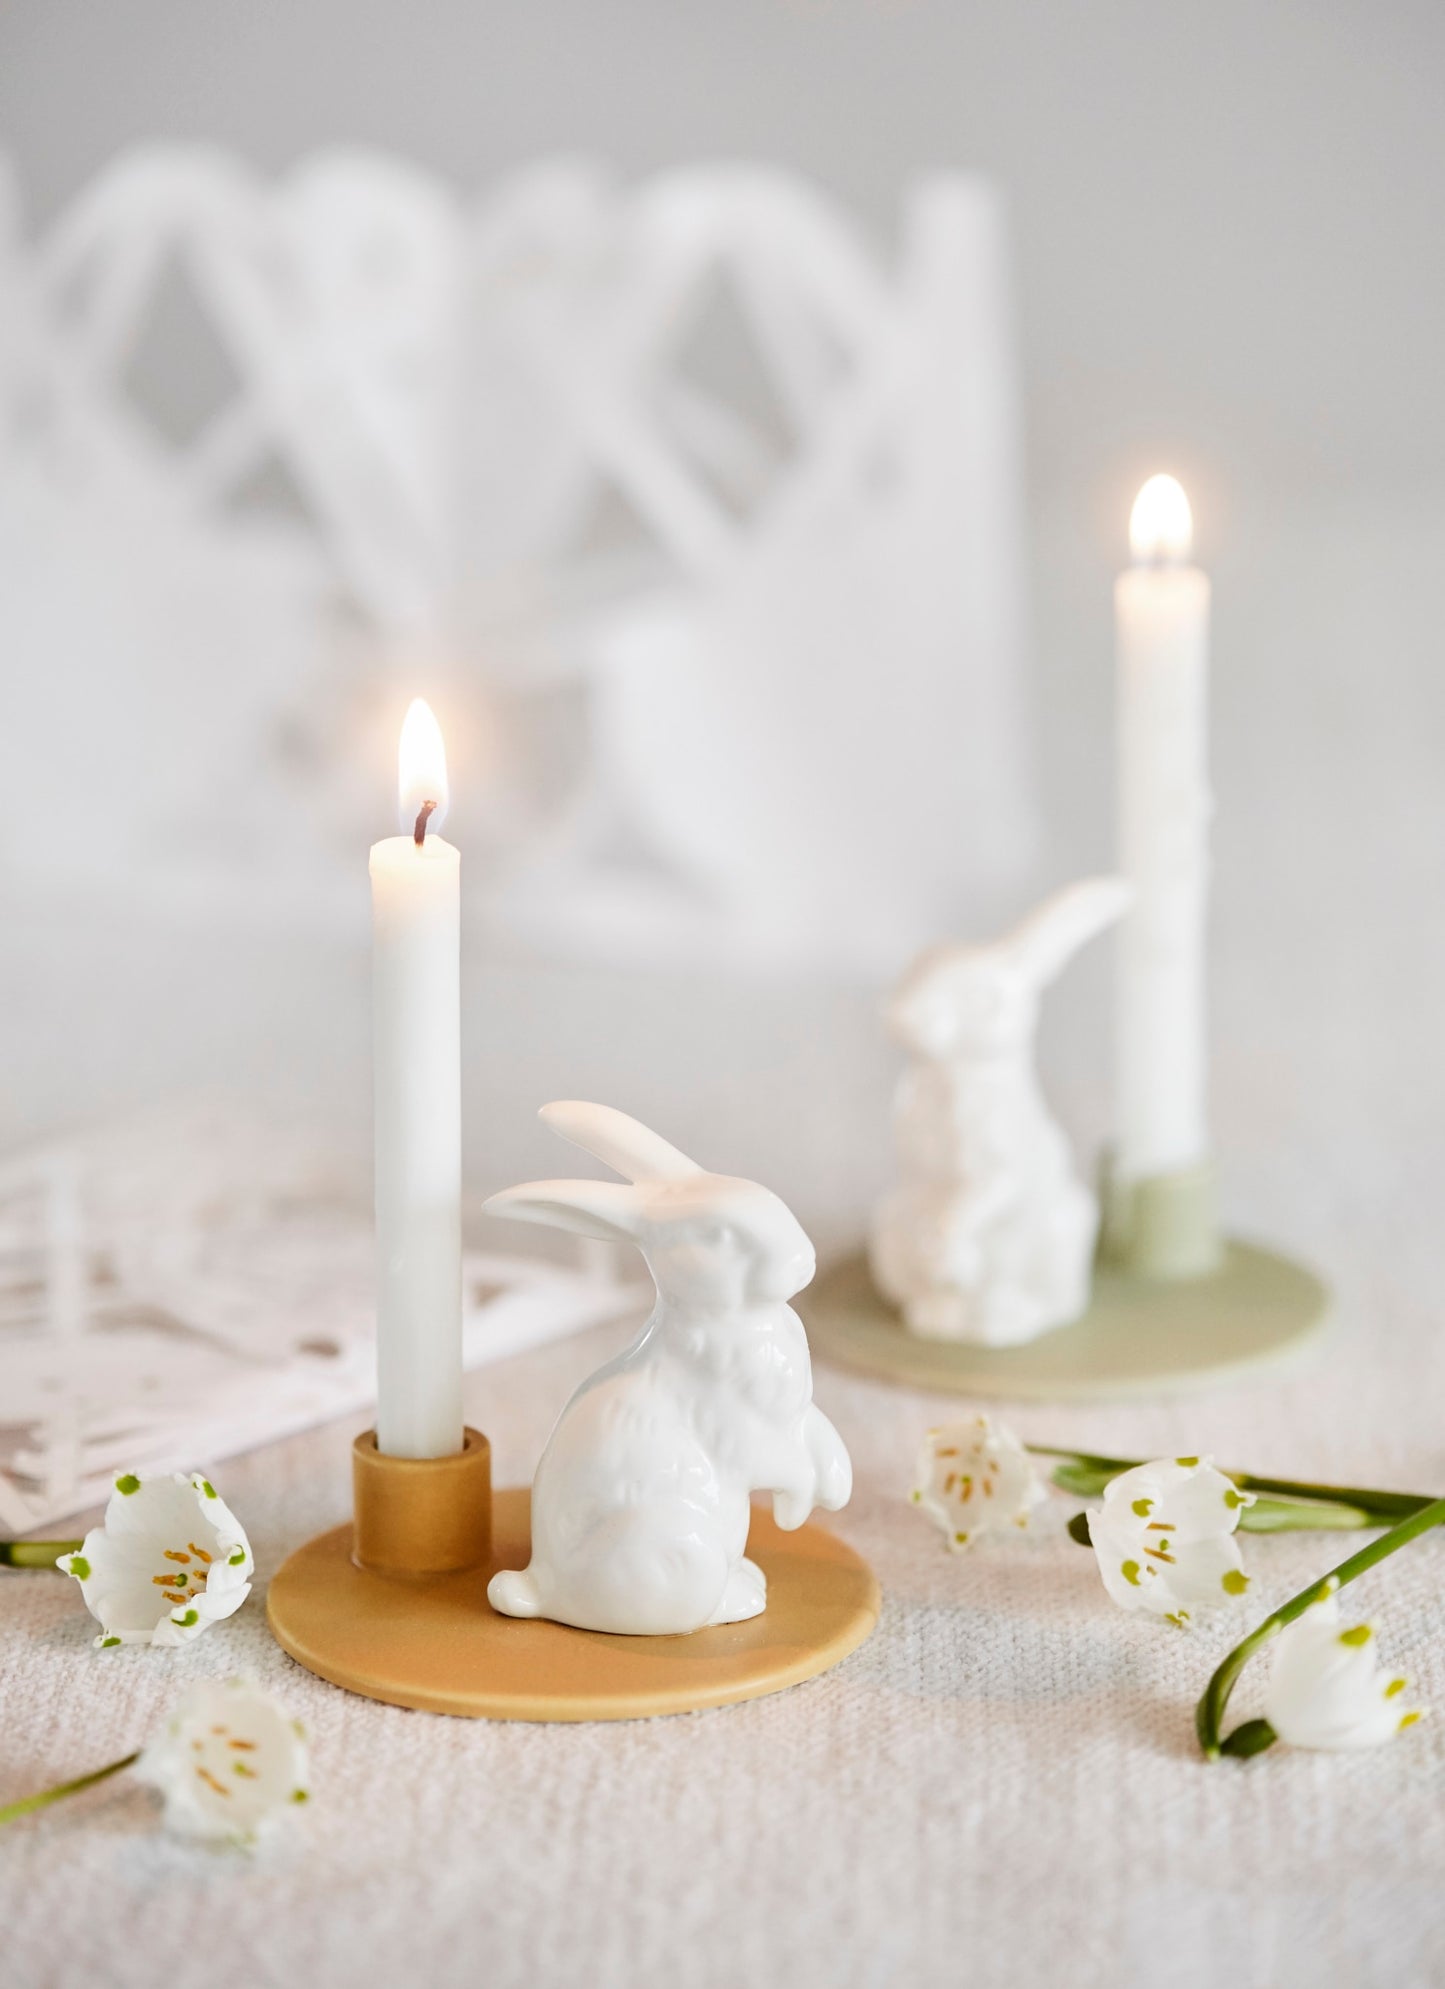 Sweet Stories Hare candlestick, Sage